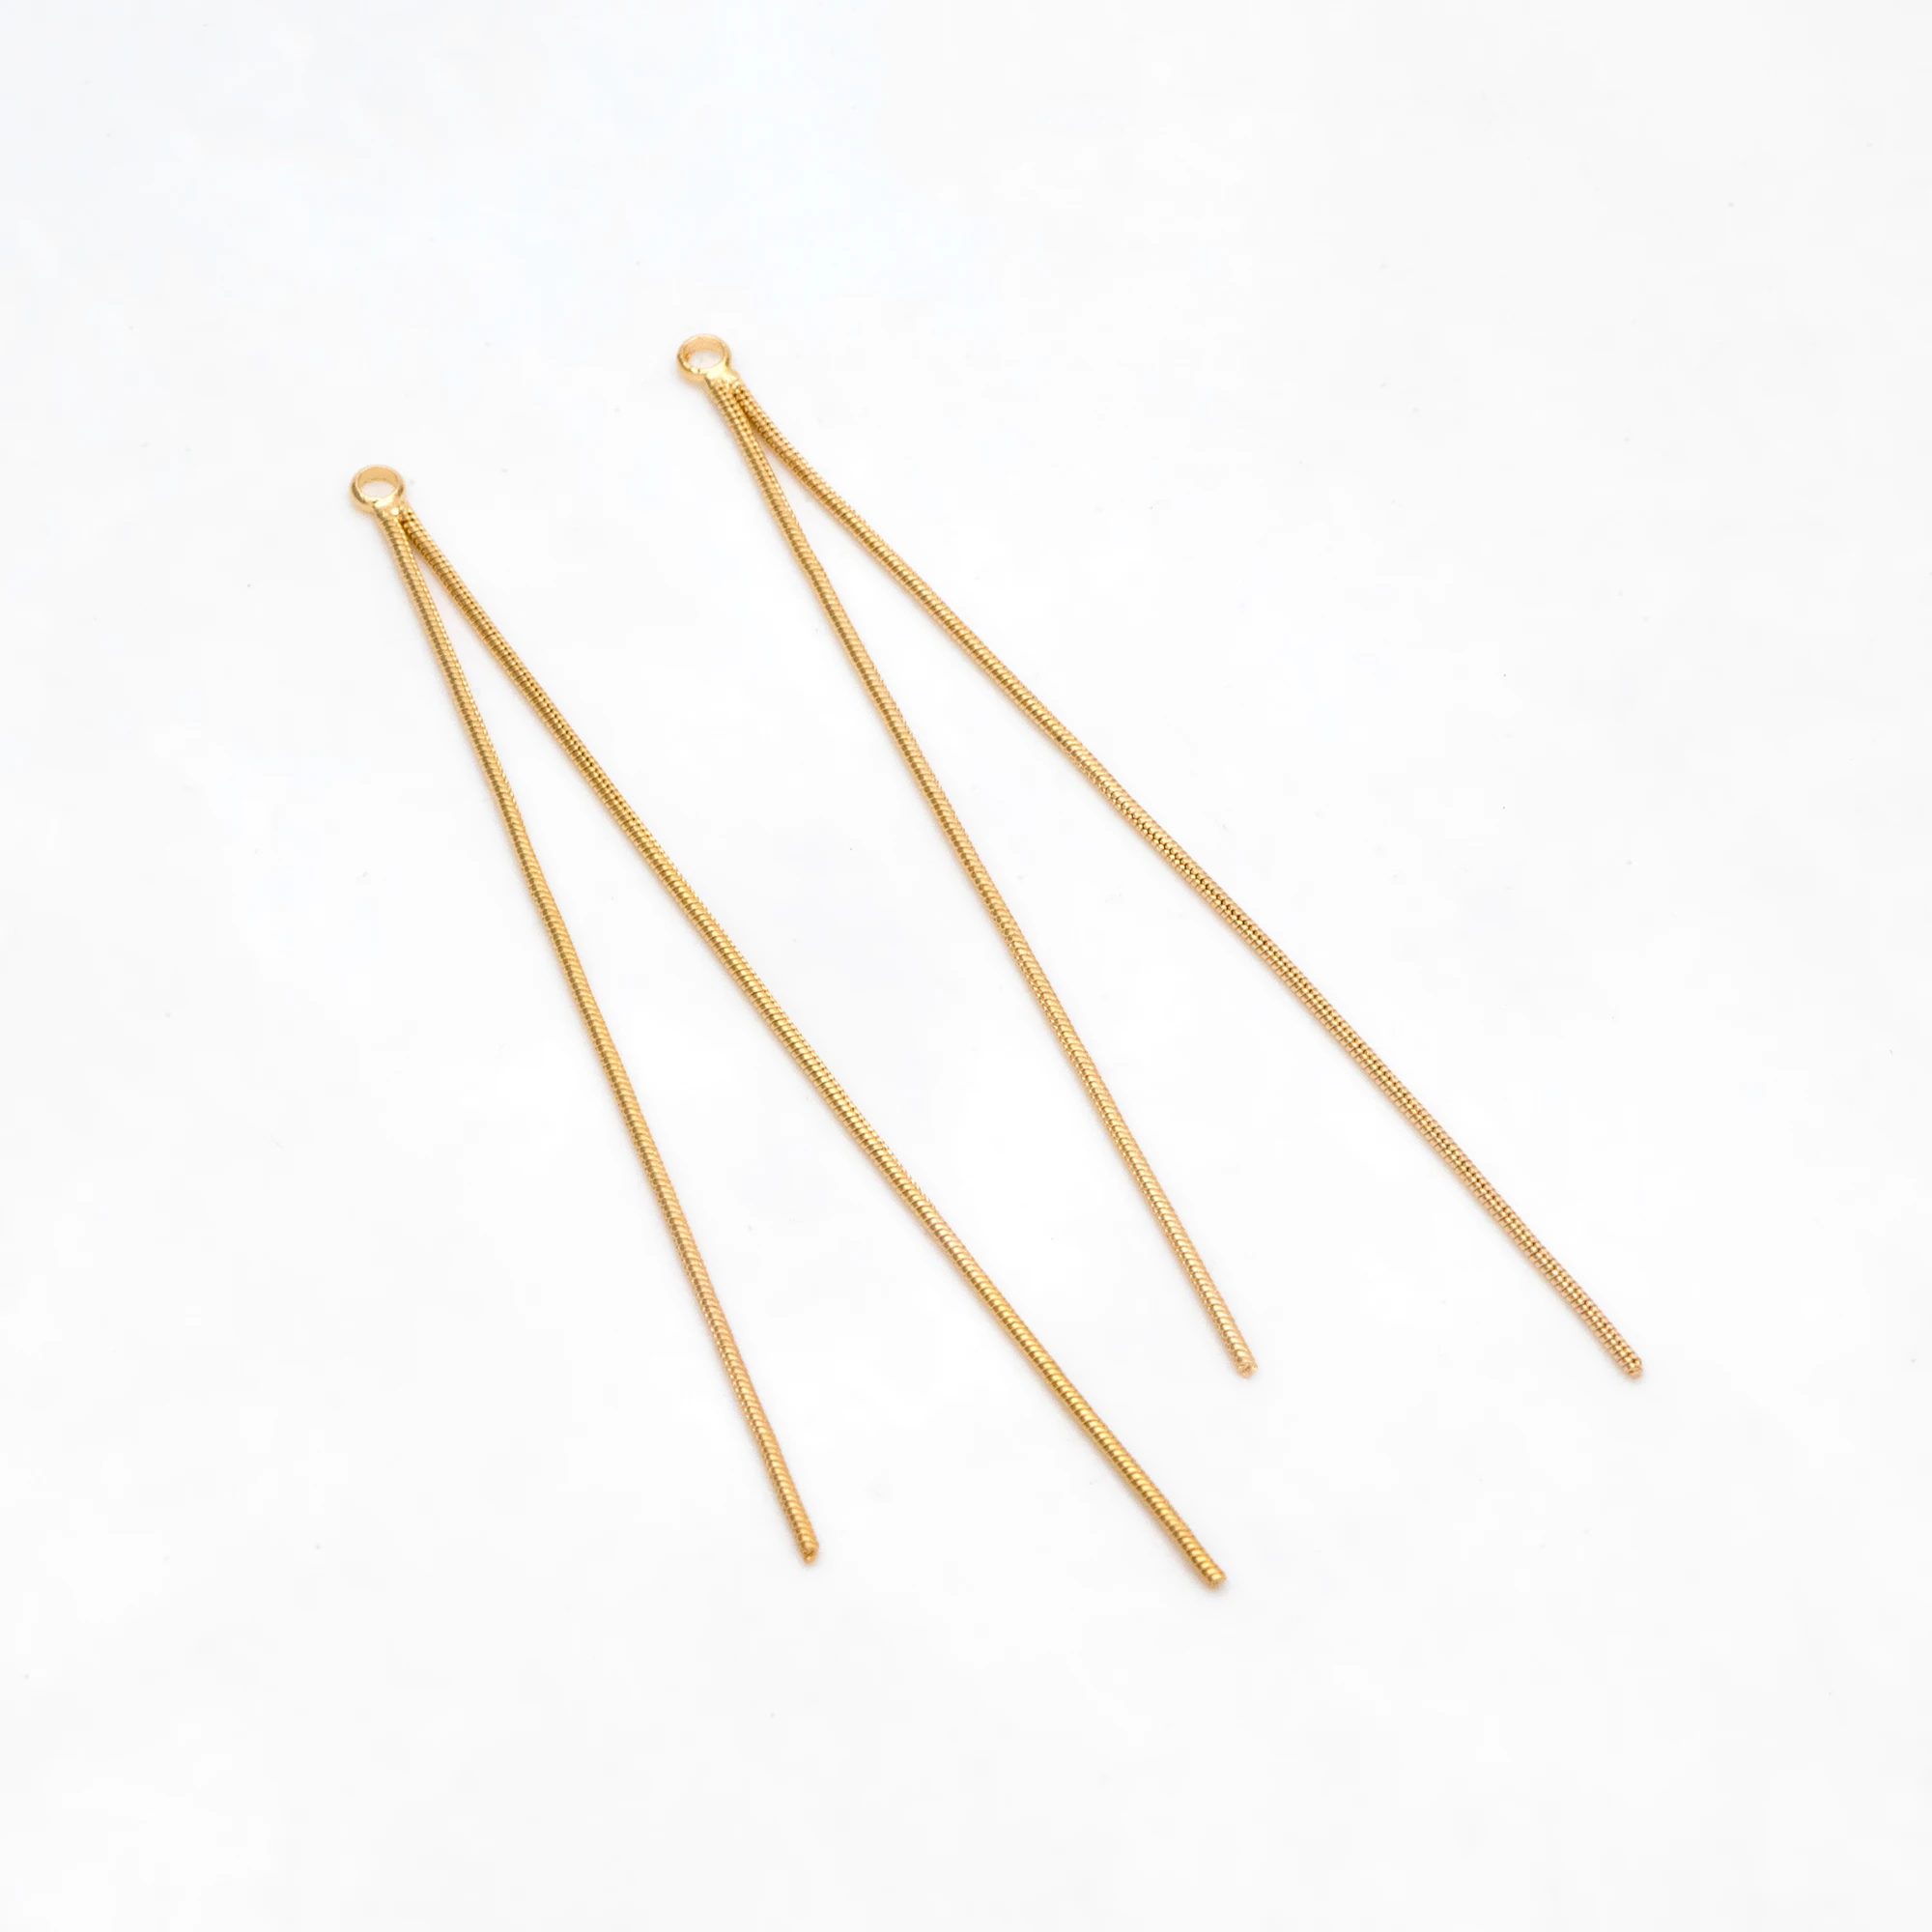 10pcs Earring Charms 82mm, Gold Plated Brass Long Chain Earwire Pendants Components (GB-463)